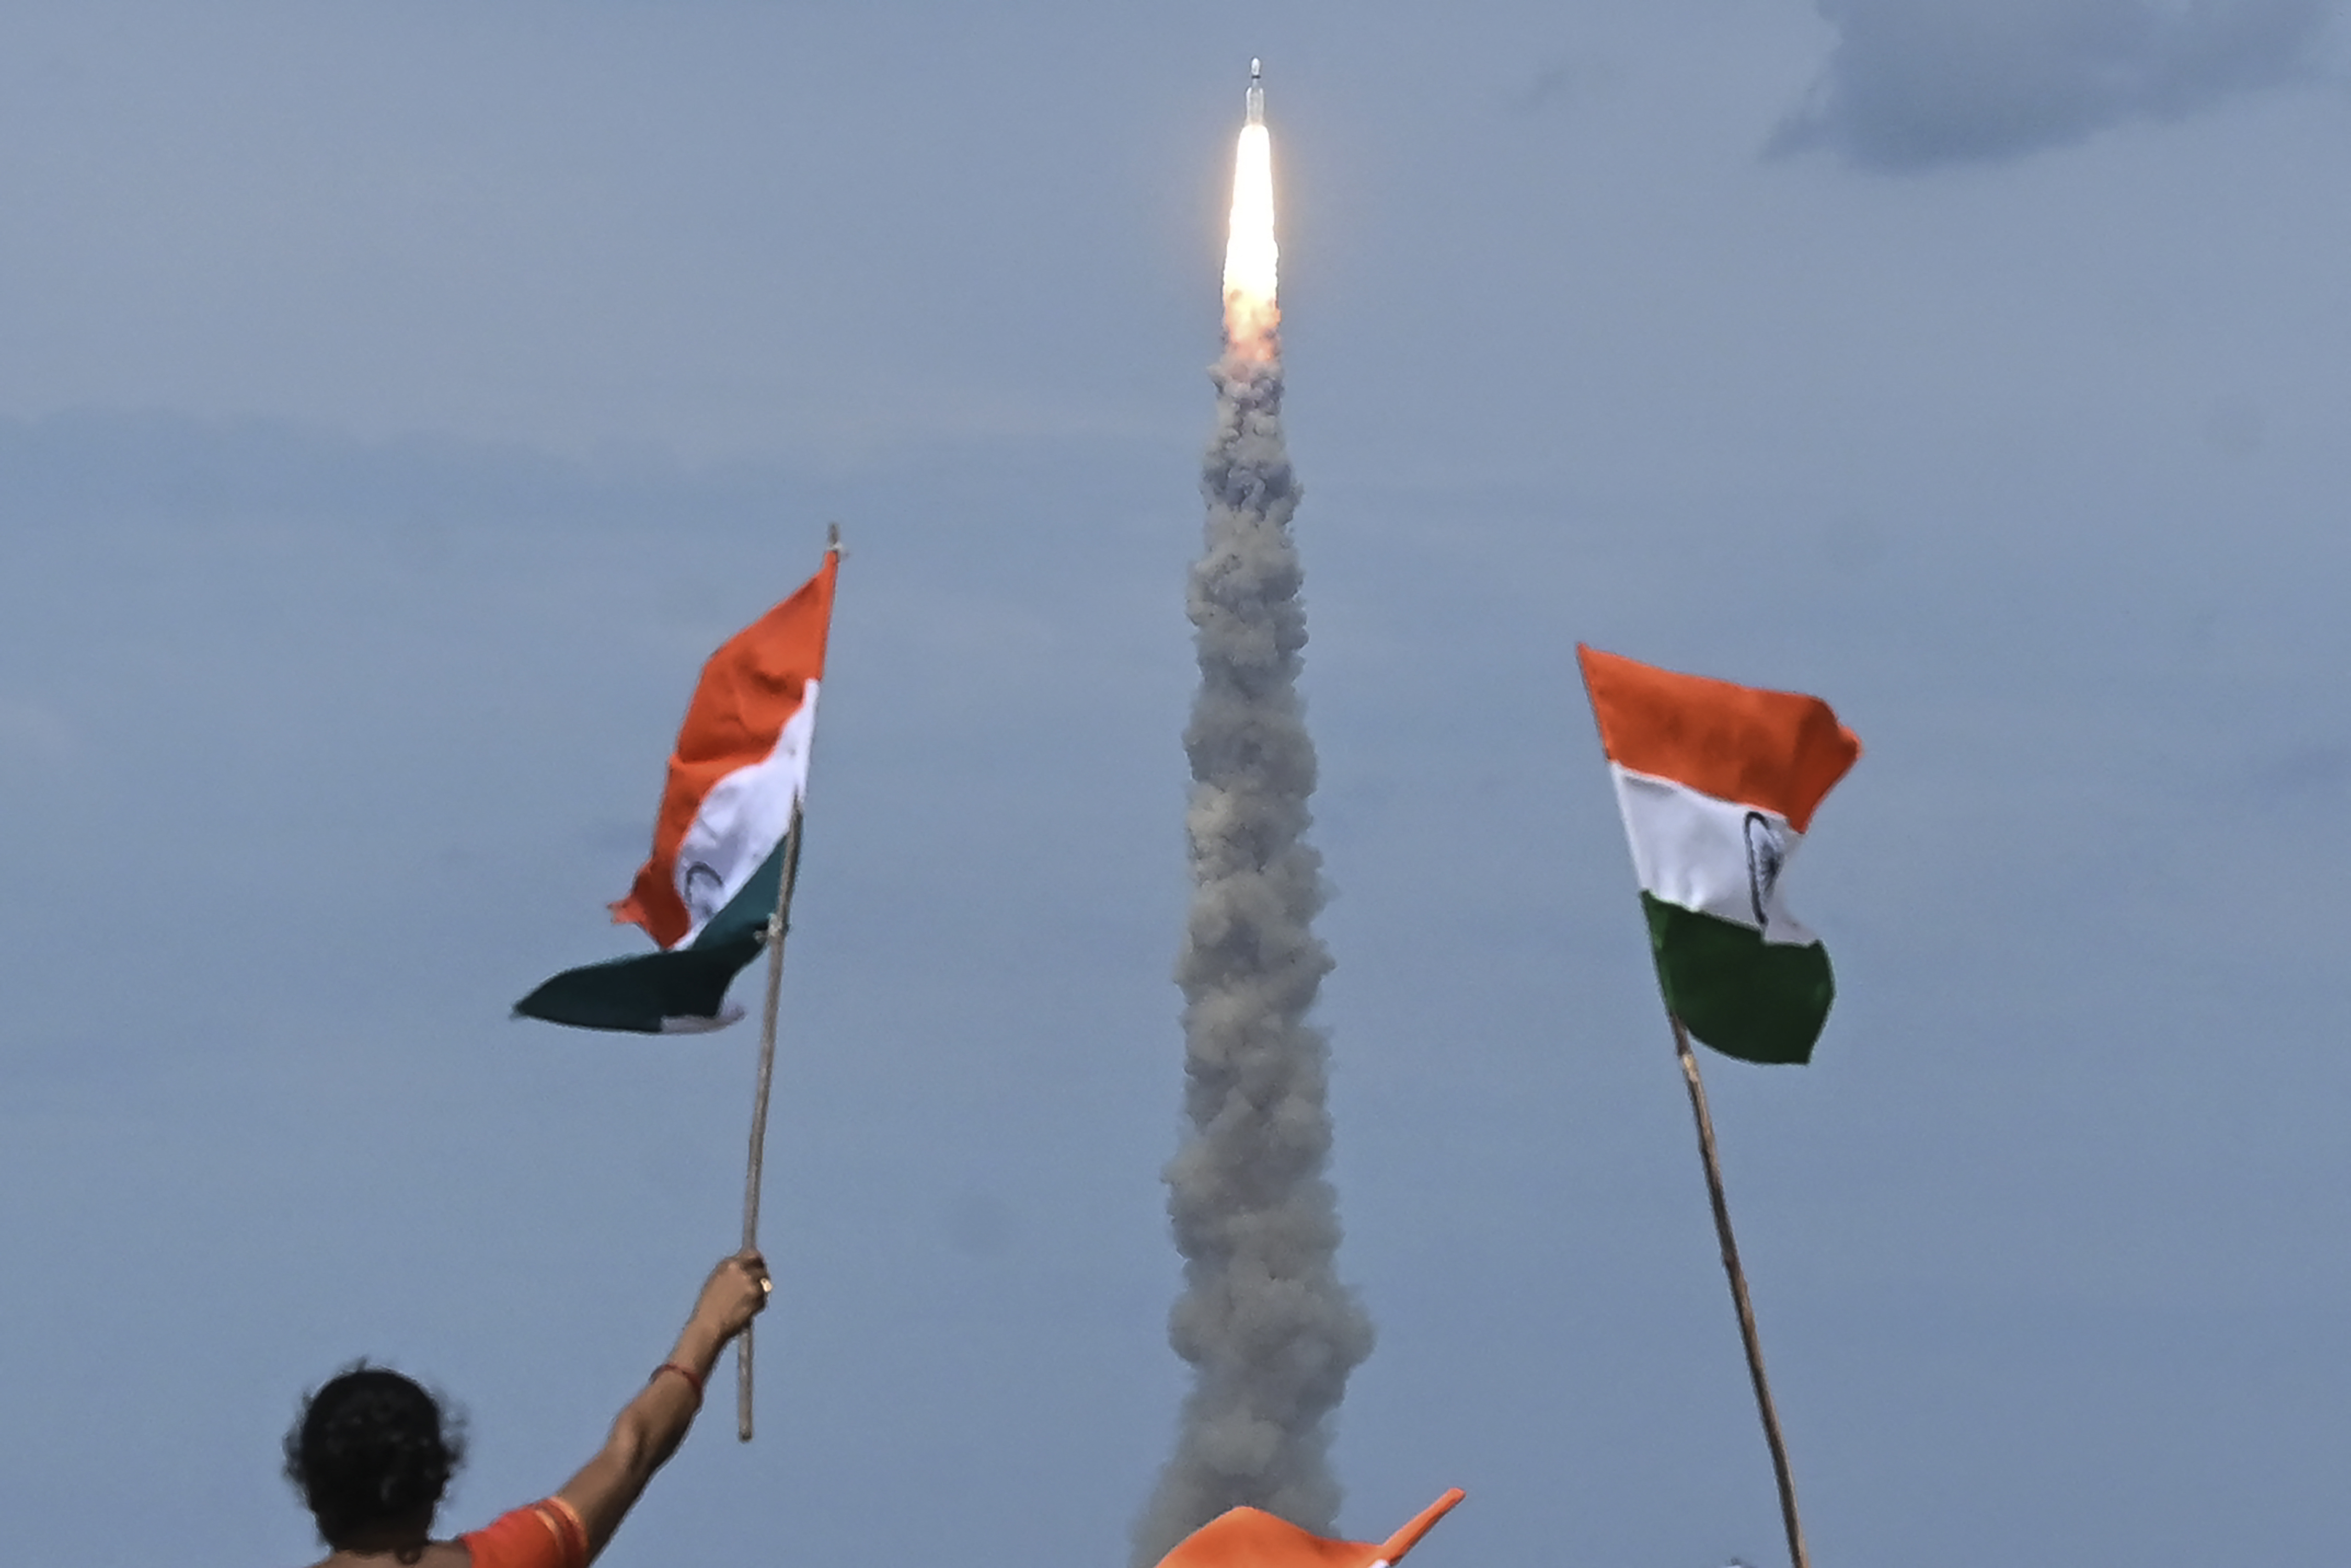 People wave Indian flags as an Indian Space Research Organization (ISRO) rocket carrying the Chandrayaan-3 spacecraft lifts off from the Satish Dhawan Space Centre in Sriharikota, an island off the coast of southern Andhra Pradesh state on July 14, 2023. (AFP via Getty Images; AFP or licensors)